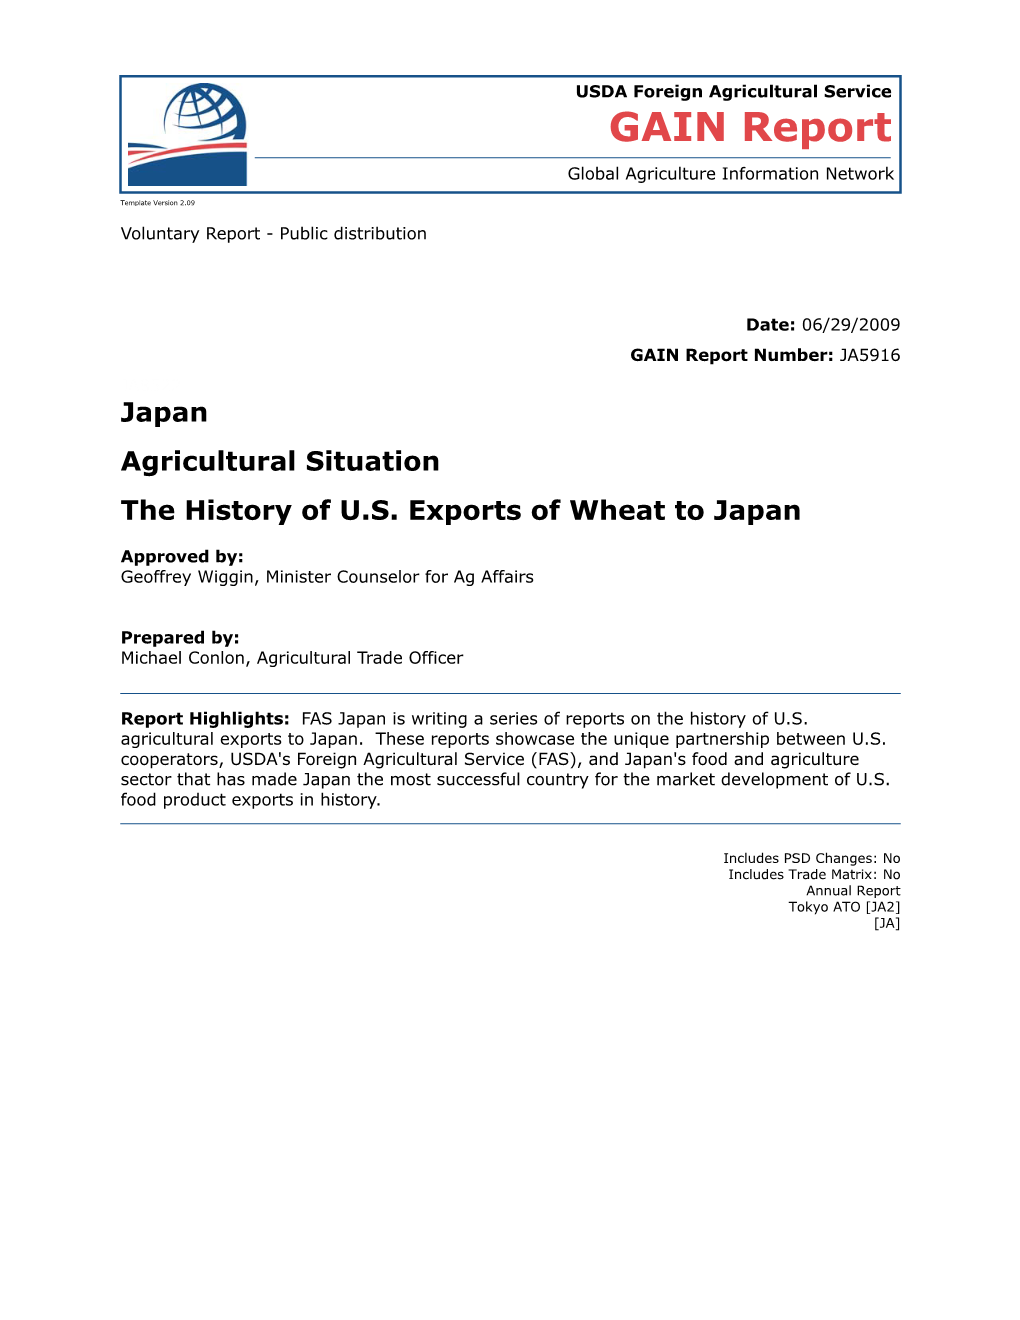 The History of U.S. Exports of Wheat to Japan